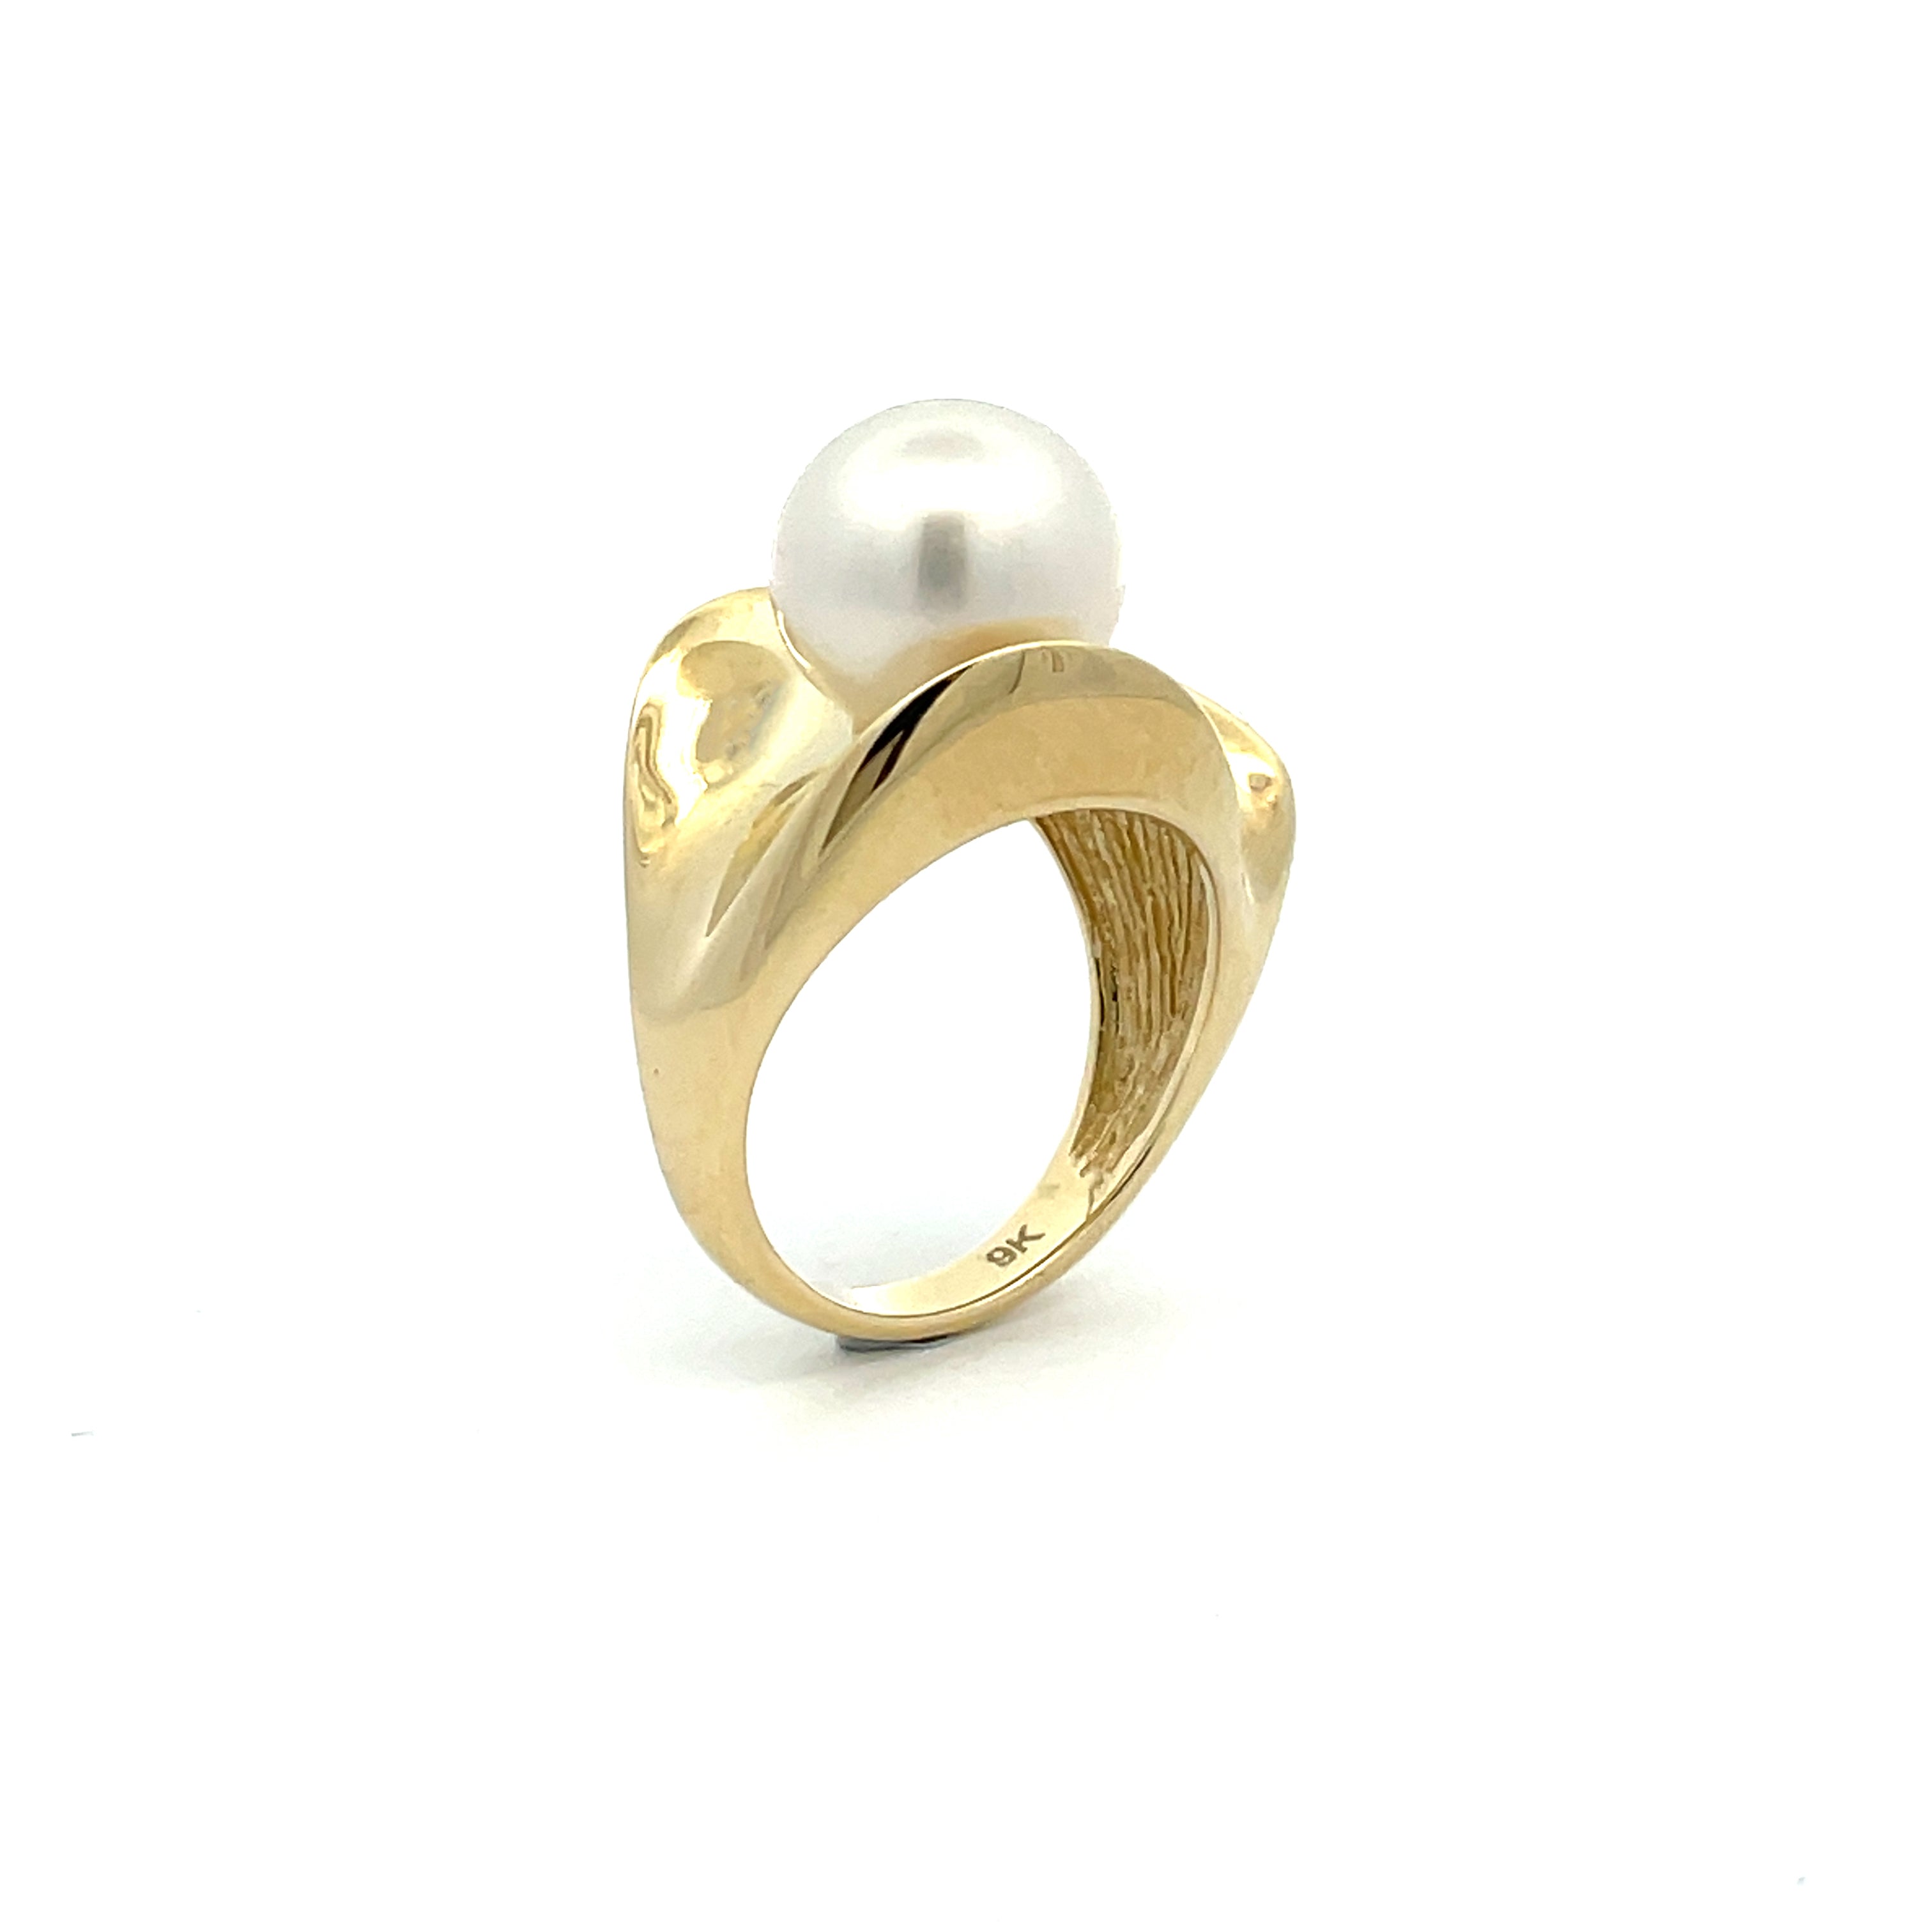 9K Yellow Gold Australian South Sea Cultured 11-12 mm Pearl Ring